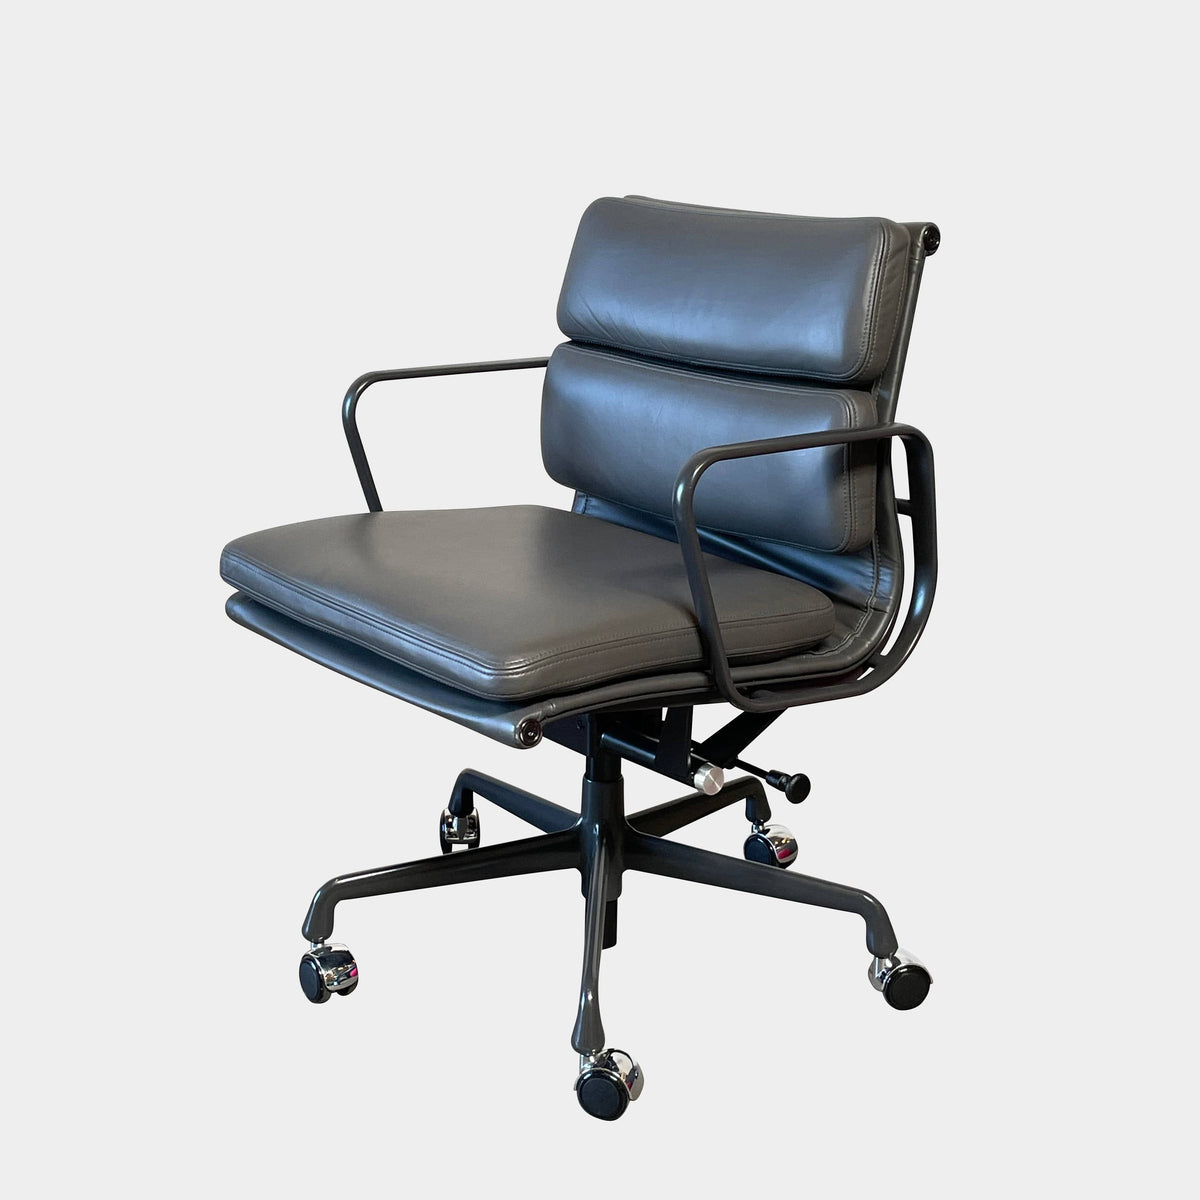 Eames Management Soft Pad Office Chair: Buy the Eames 